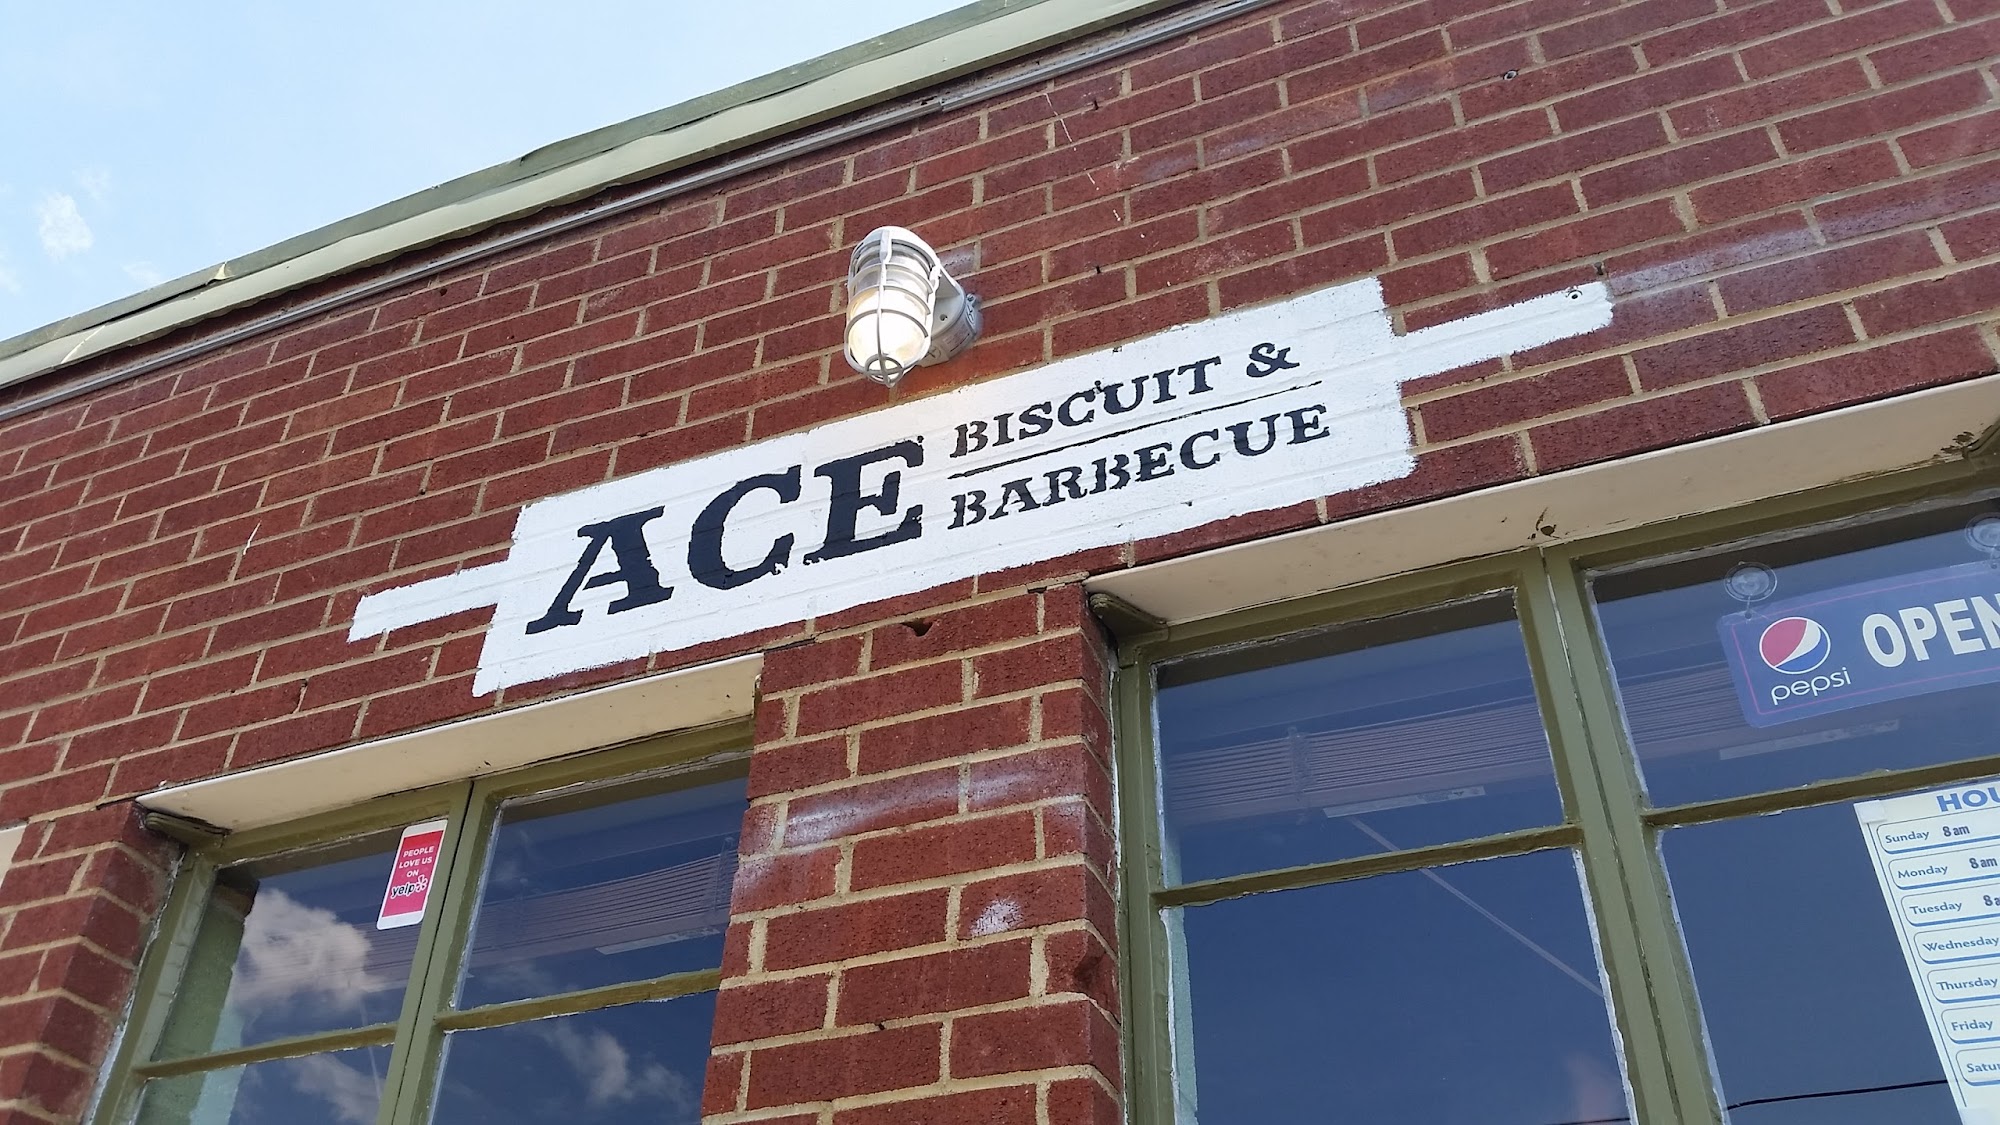 Ace Biscuit & Barbecue